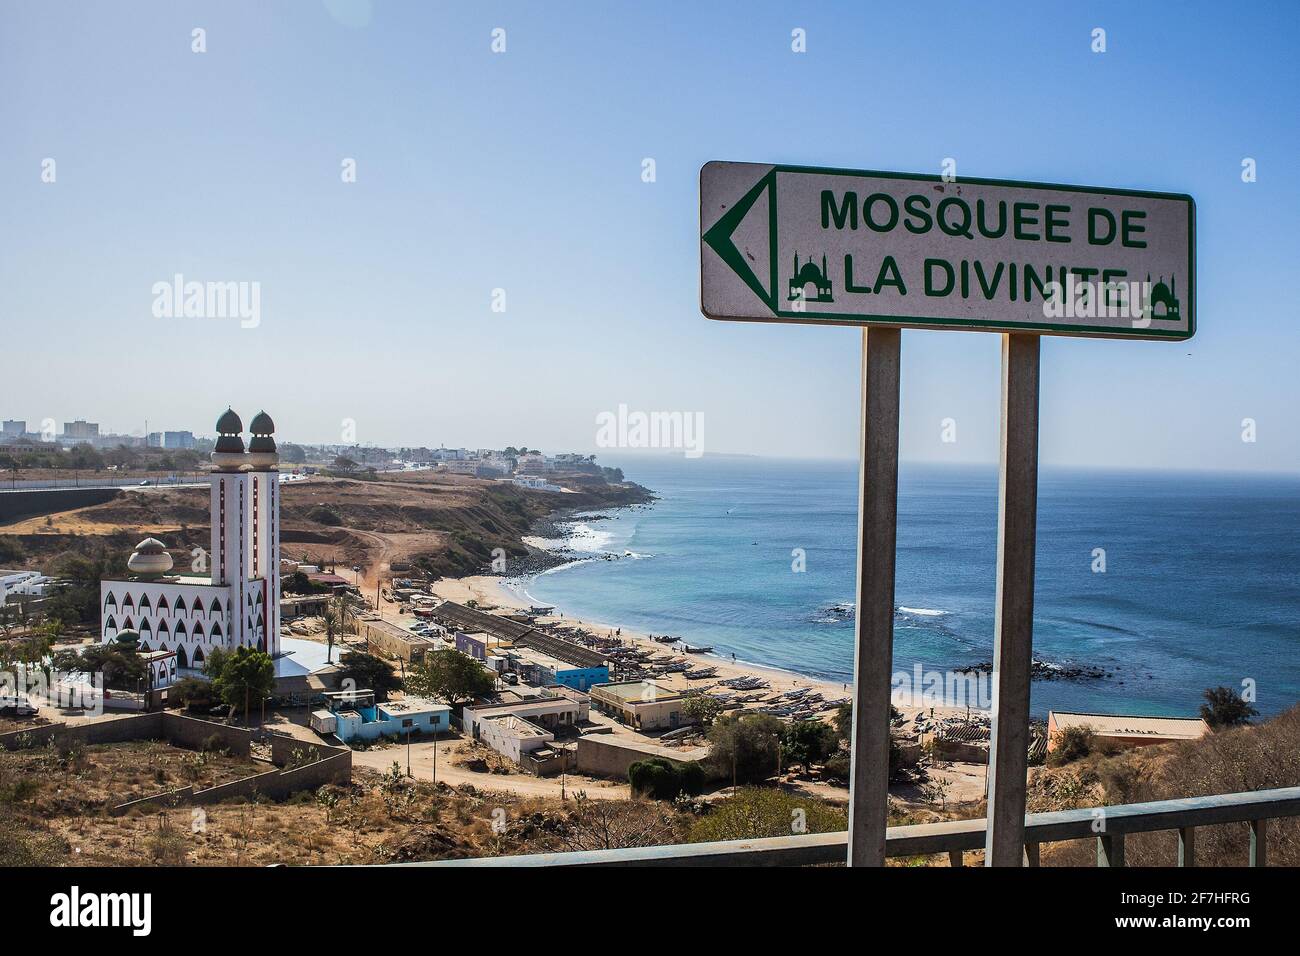 Mosque of divinity or mosquee de la divinite in Dakar, Senegal, behind a signboard leading towards the mosque on a sunny day. City of Dakar in the bac Stock Photo